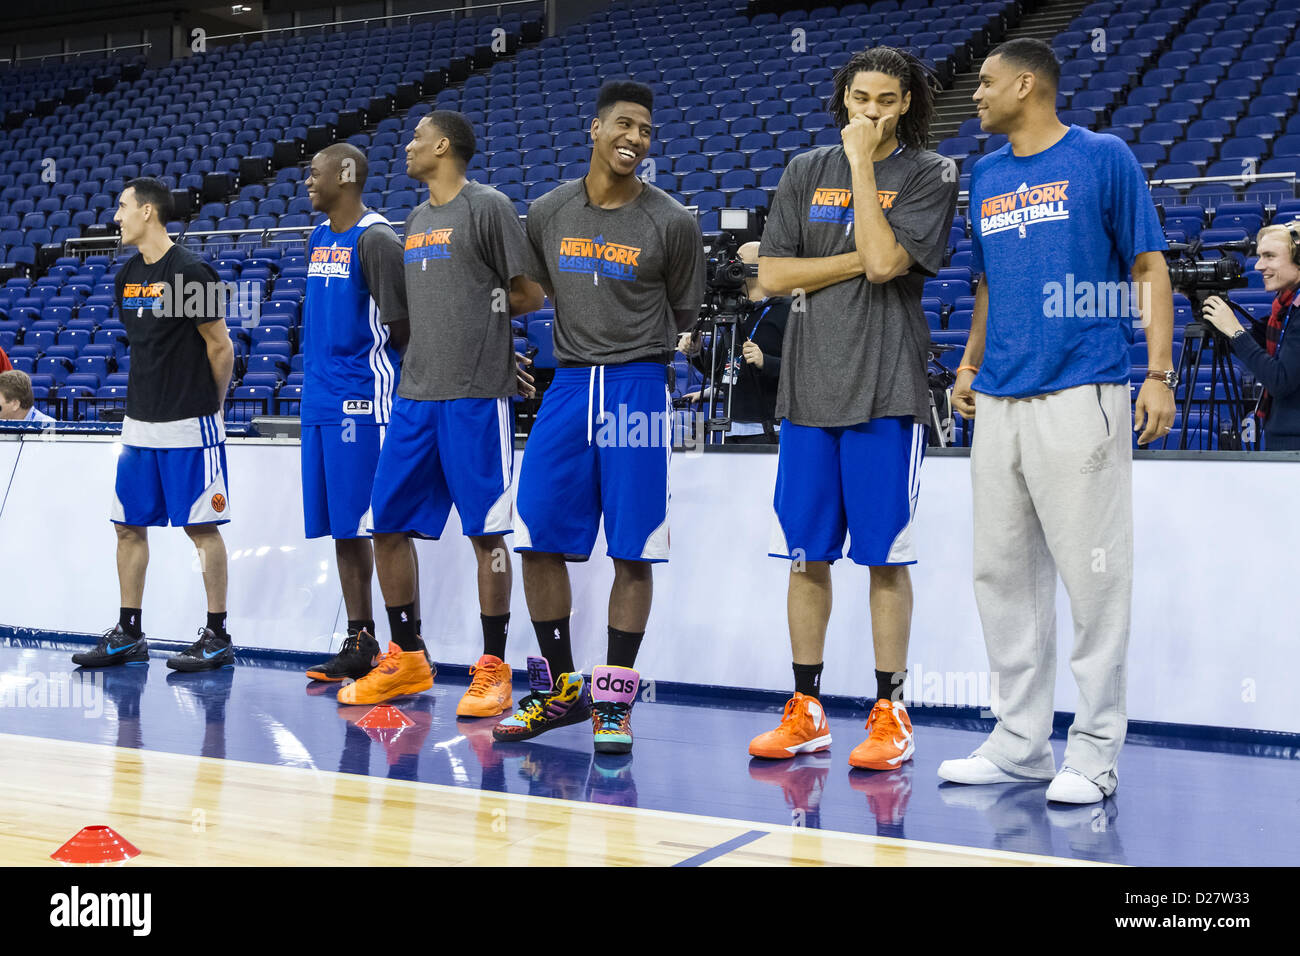 London, UK. 16th January 2013. New York Knicks players line up for ...